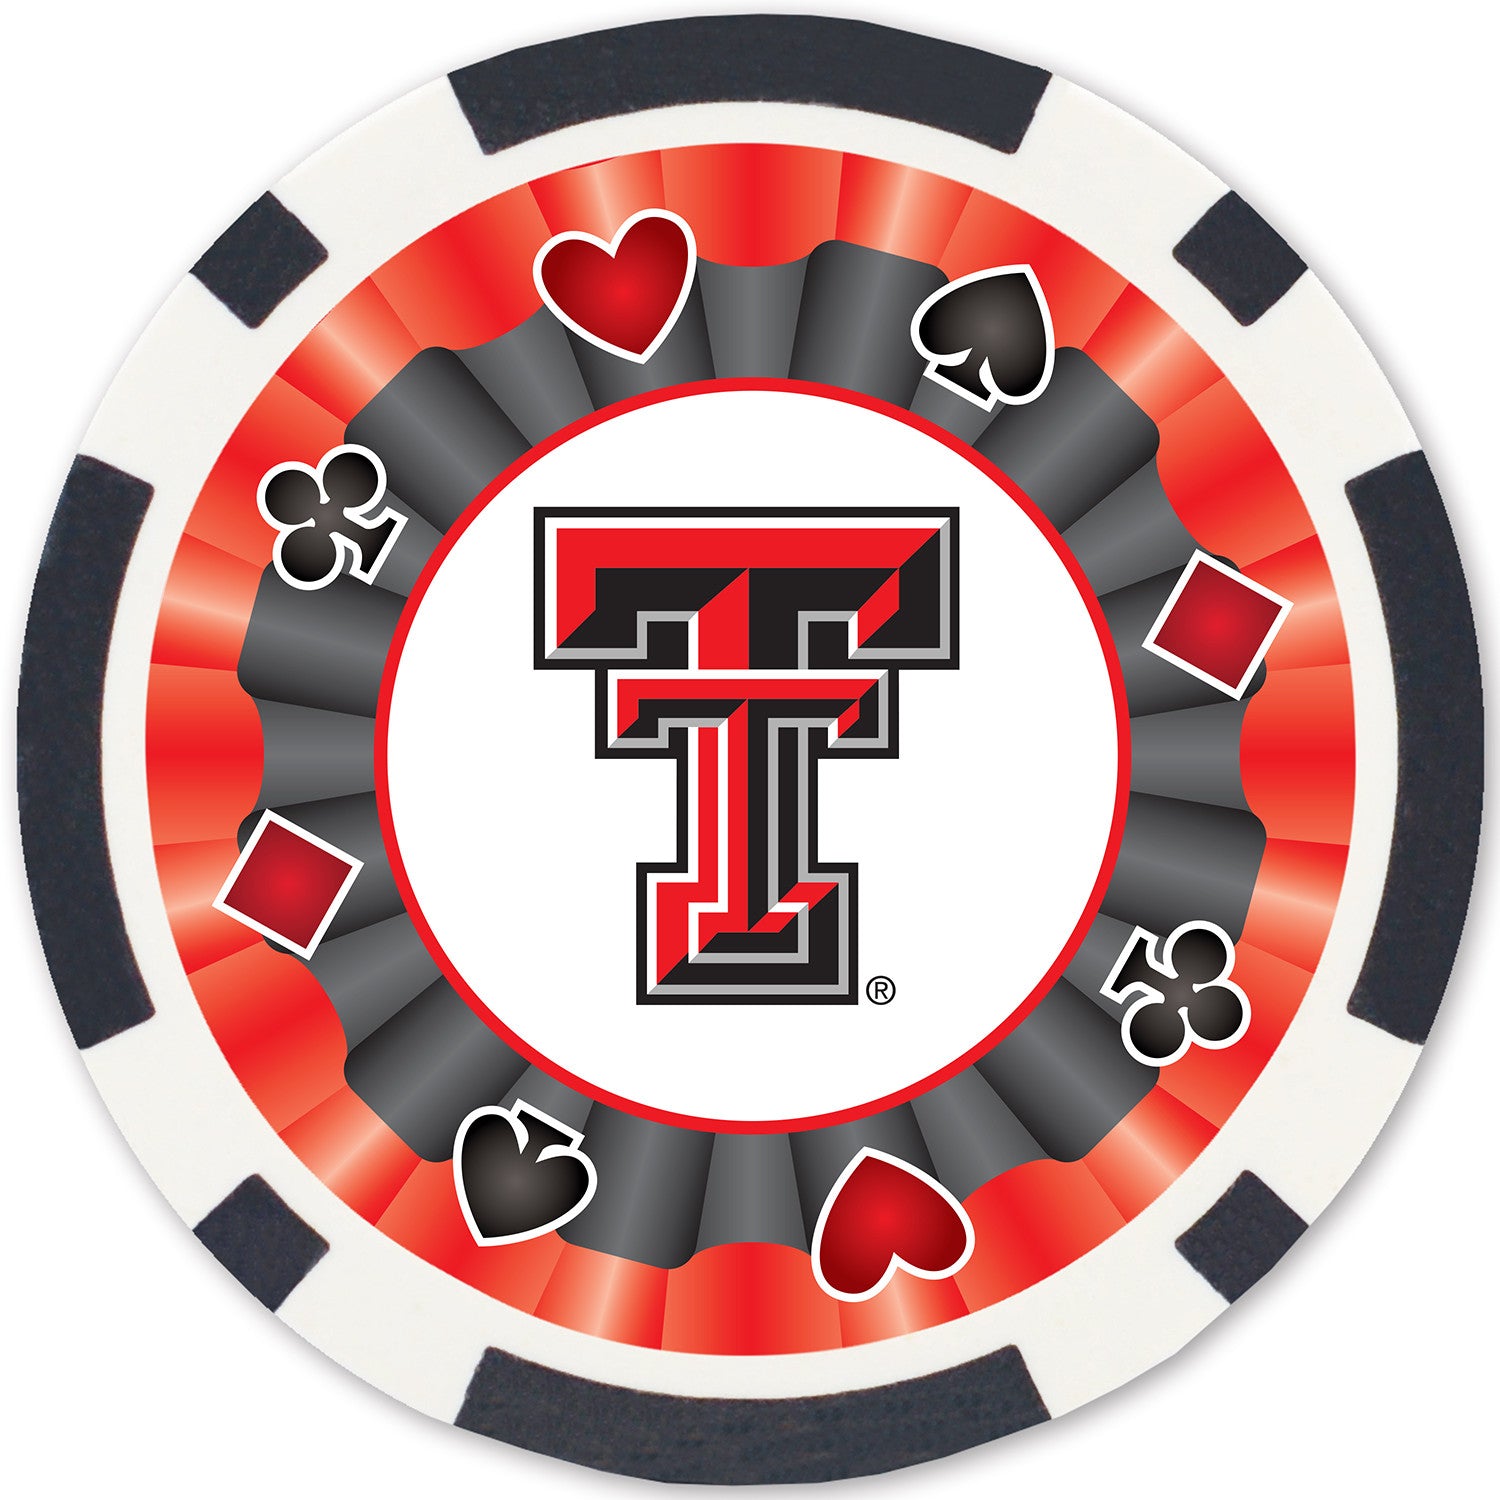 Texas Tech Red Raiders 100 Piece Poker Chips